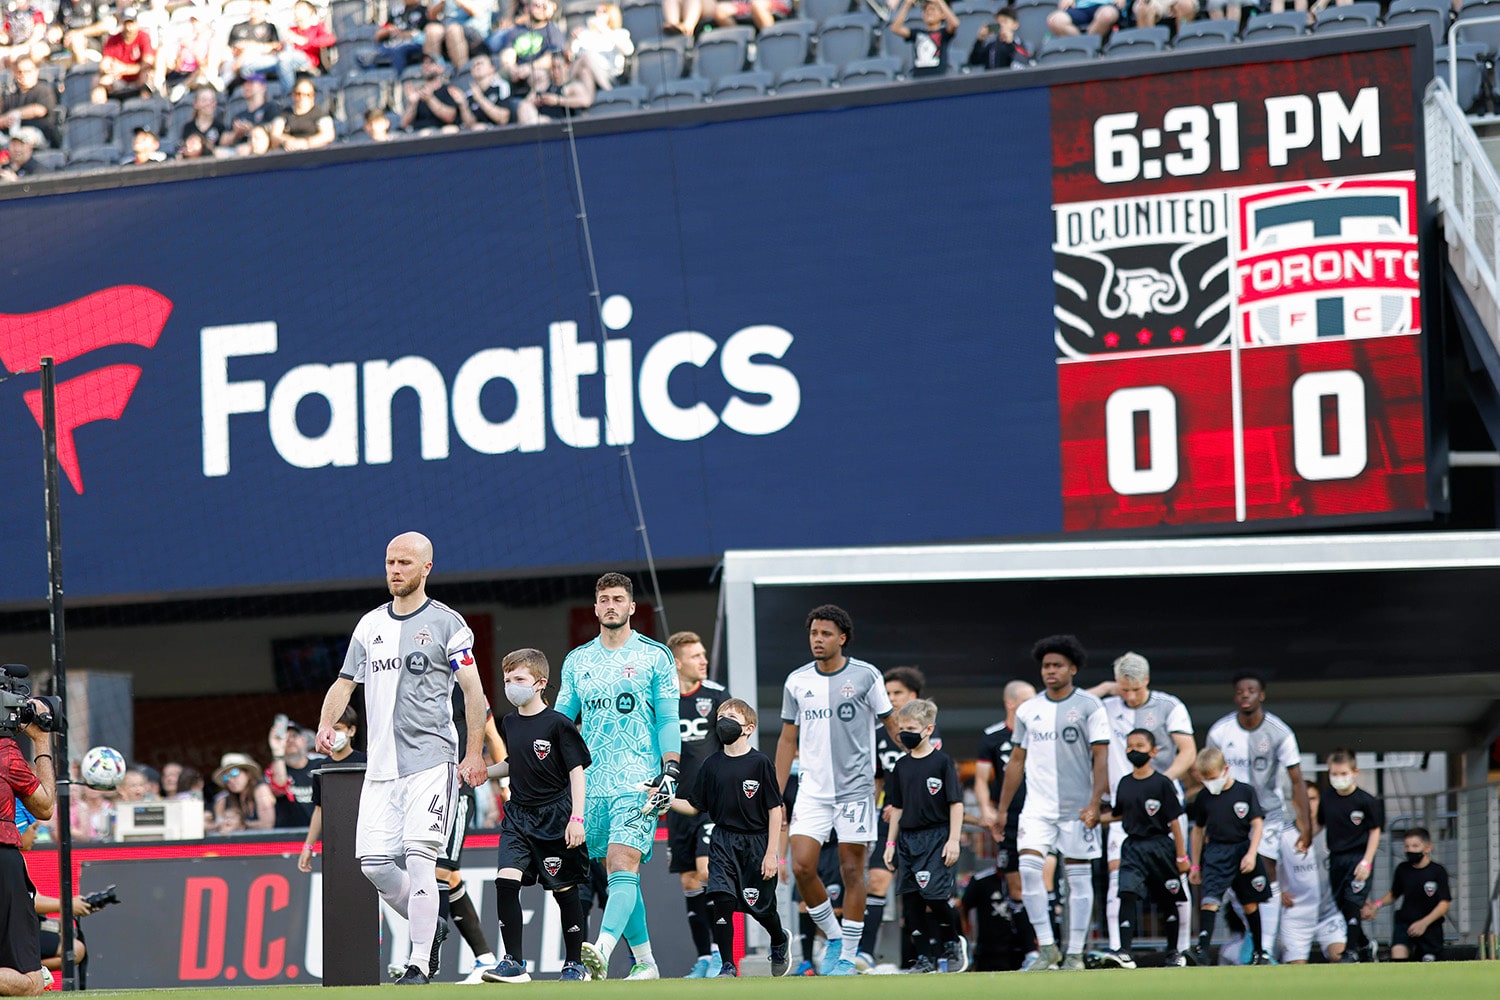 Toronto FC and DC United squads walk in front of Fanatics advertisement